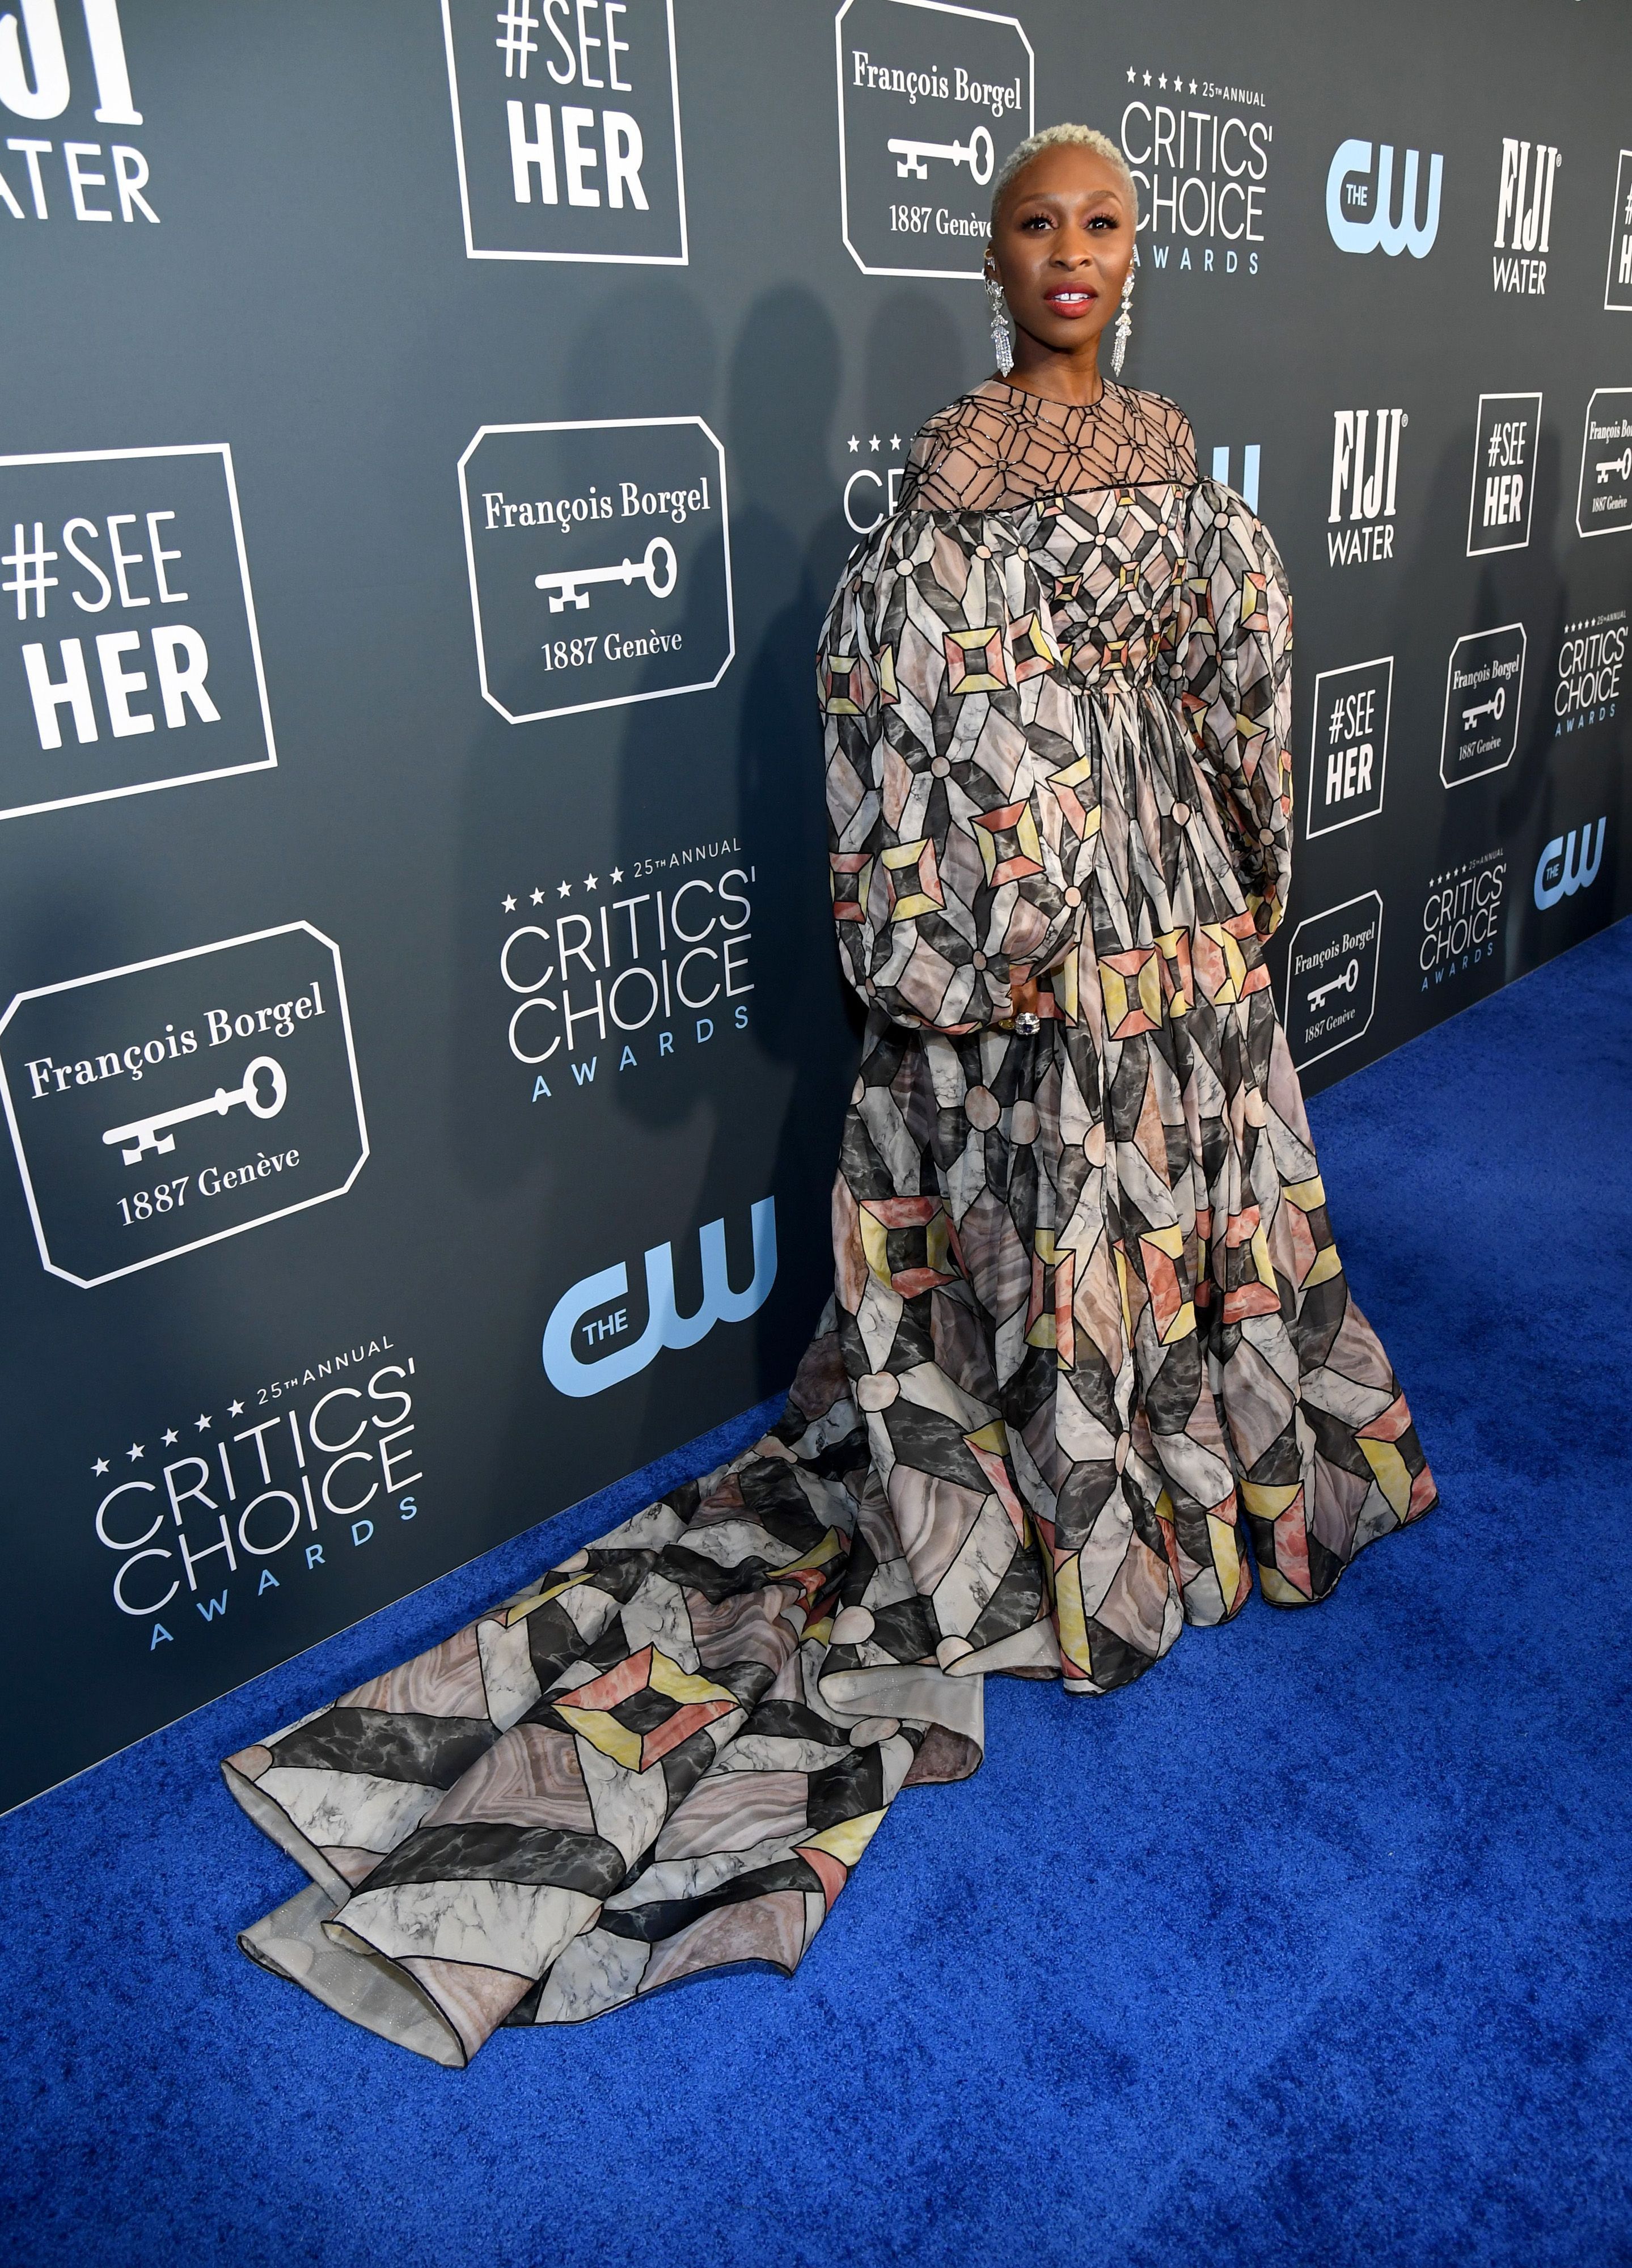 The Best Fashion Moments From The 25th Annual Critics' Choice Awards